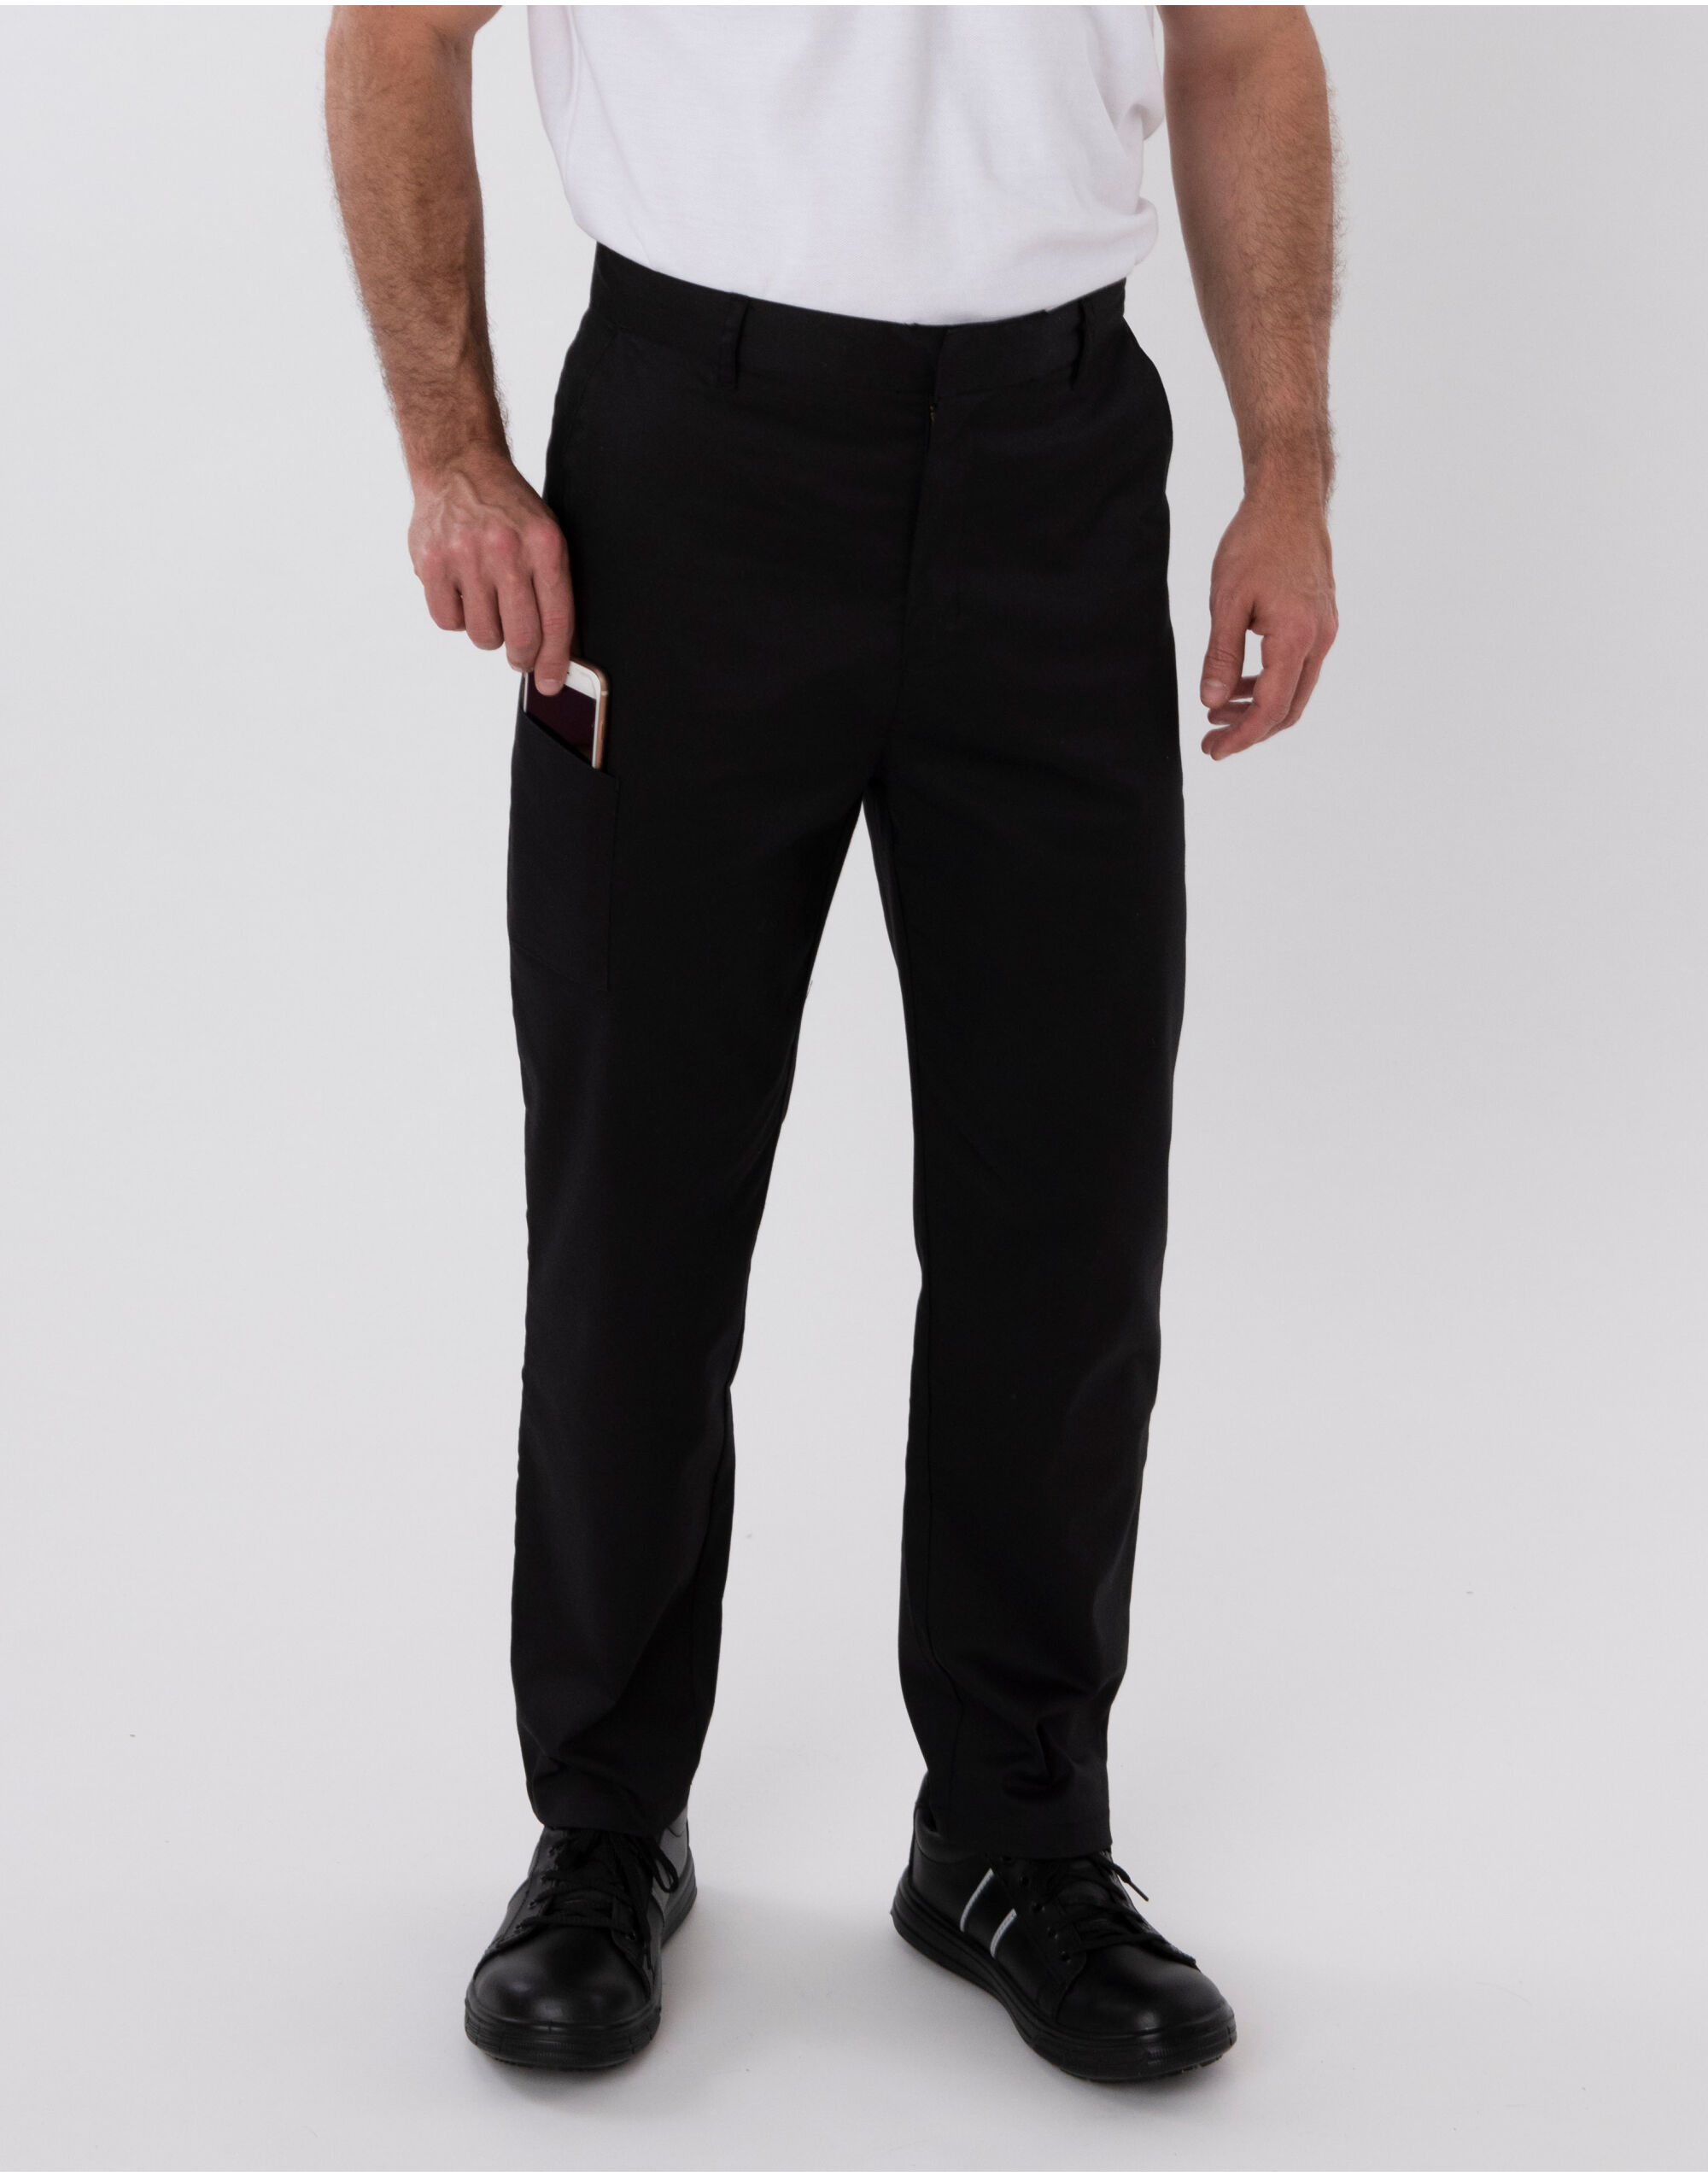 AFD Men's Stretch Trousers